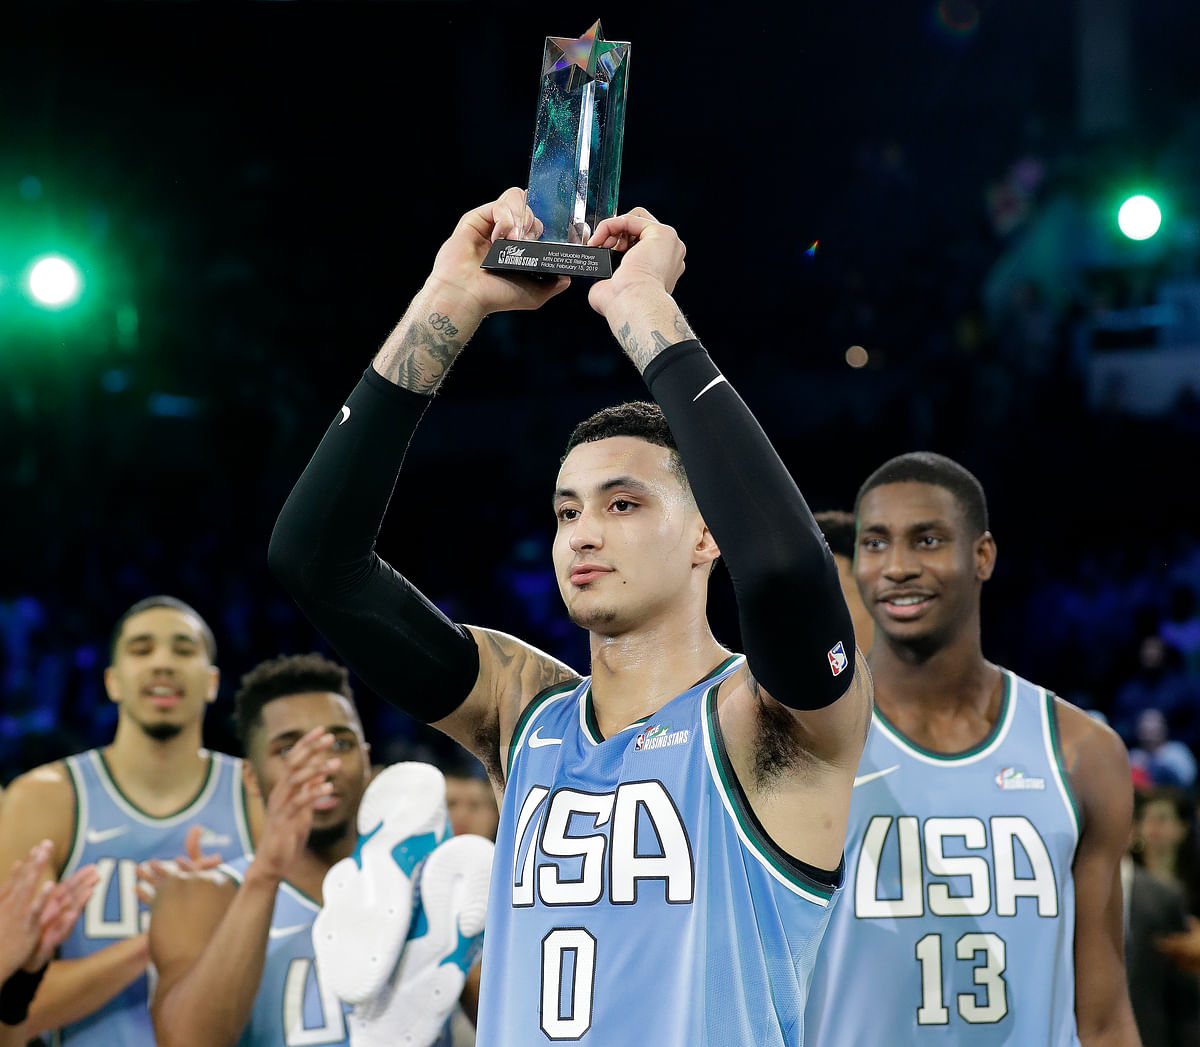 ICYMI: Here’s a look at the highlights fromthe just-concluded All-Star Weekend 2019.